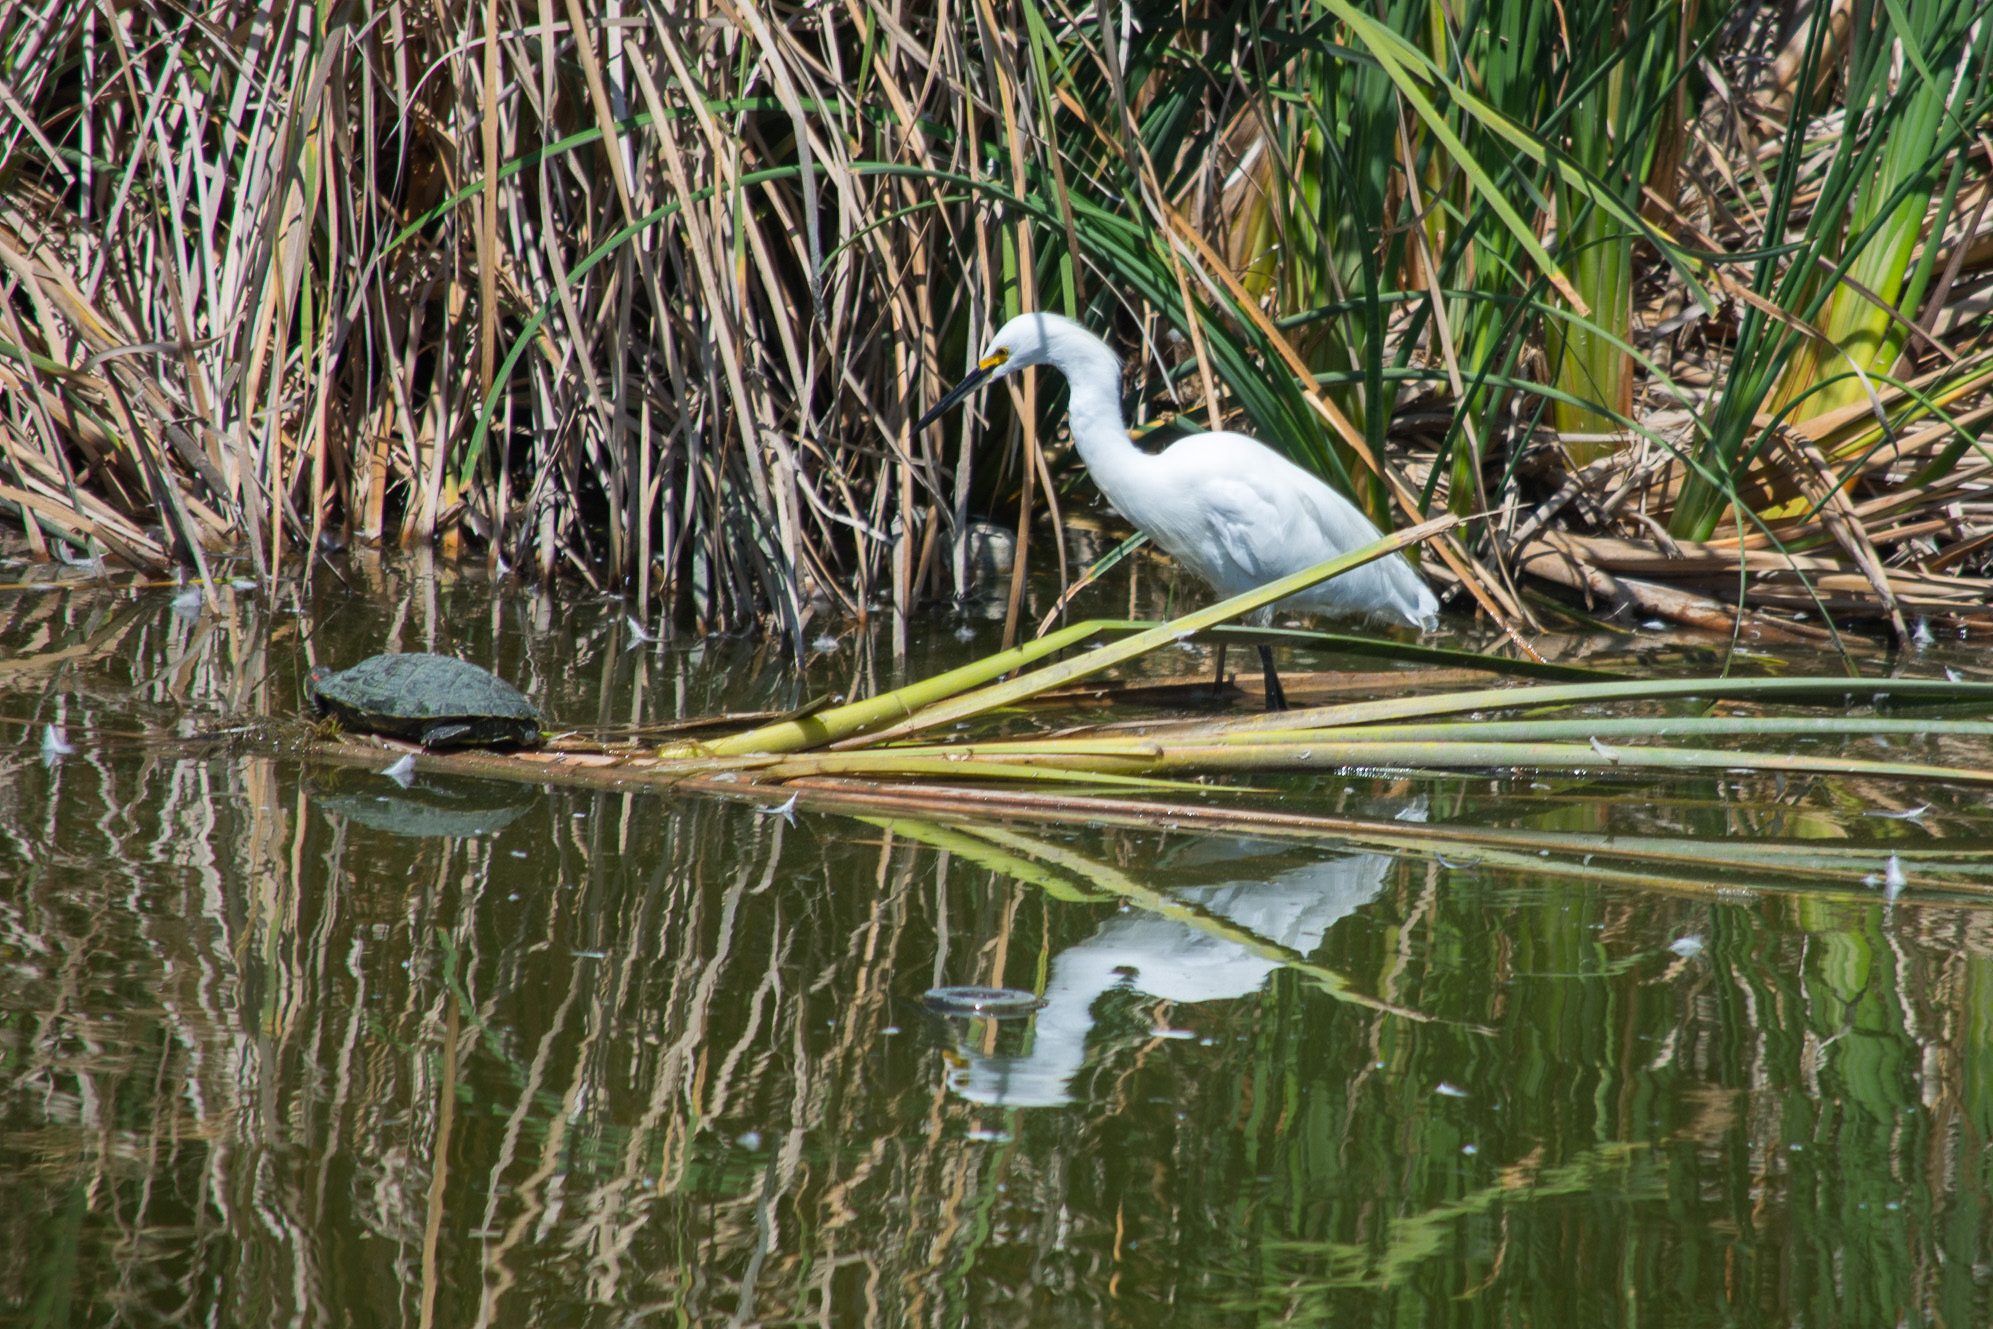 The tortoise and the egret